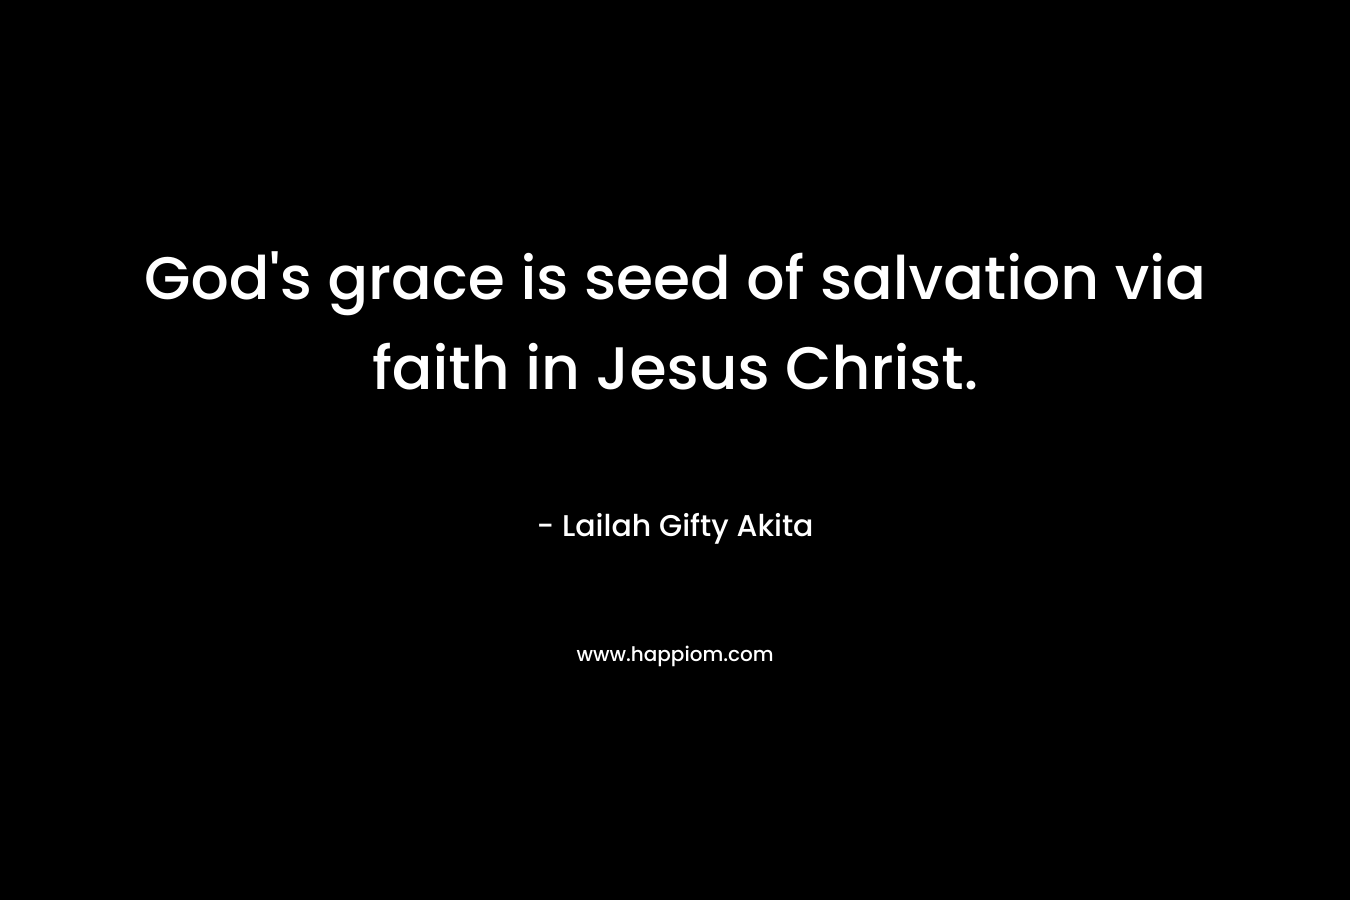 God's grace is seed of salvation via faith in Jesus Christ.